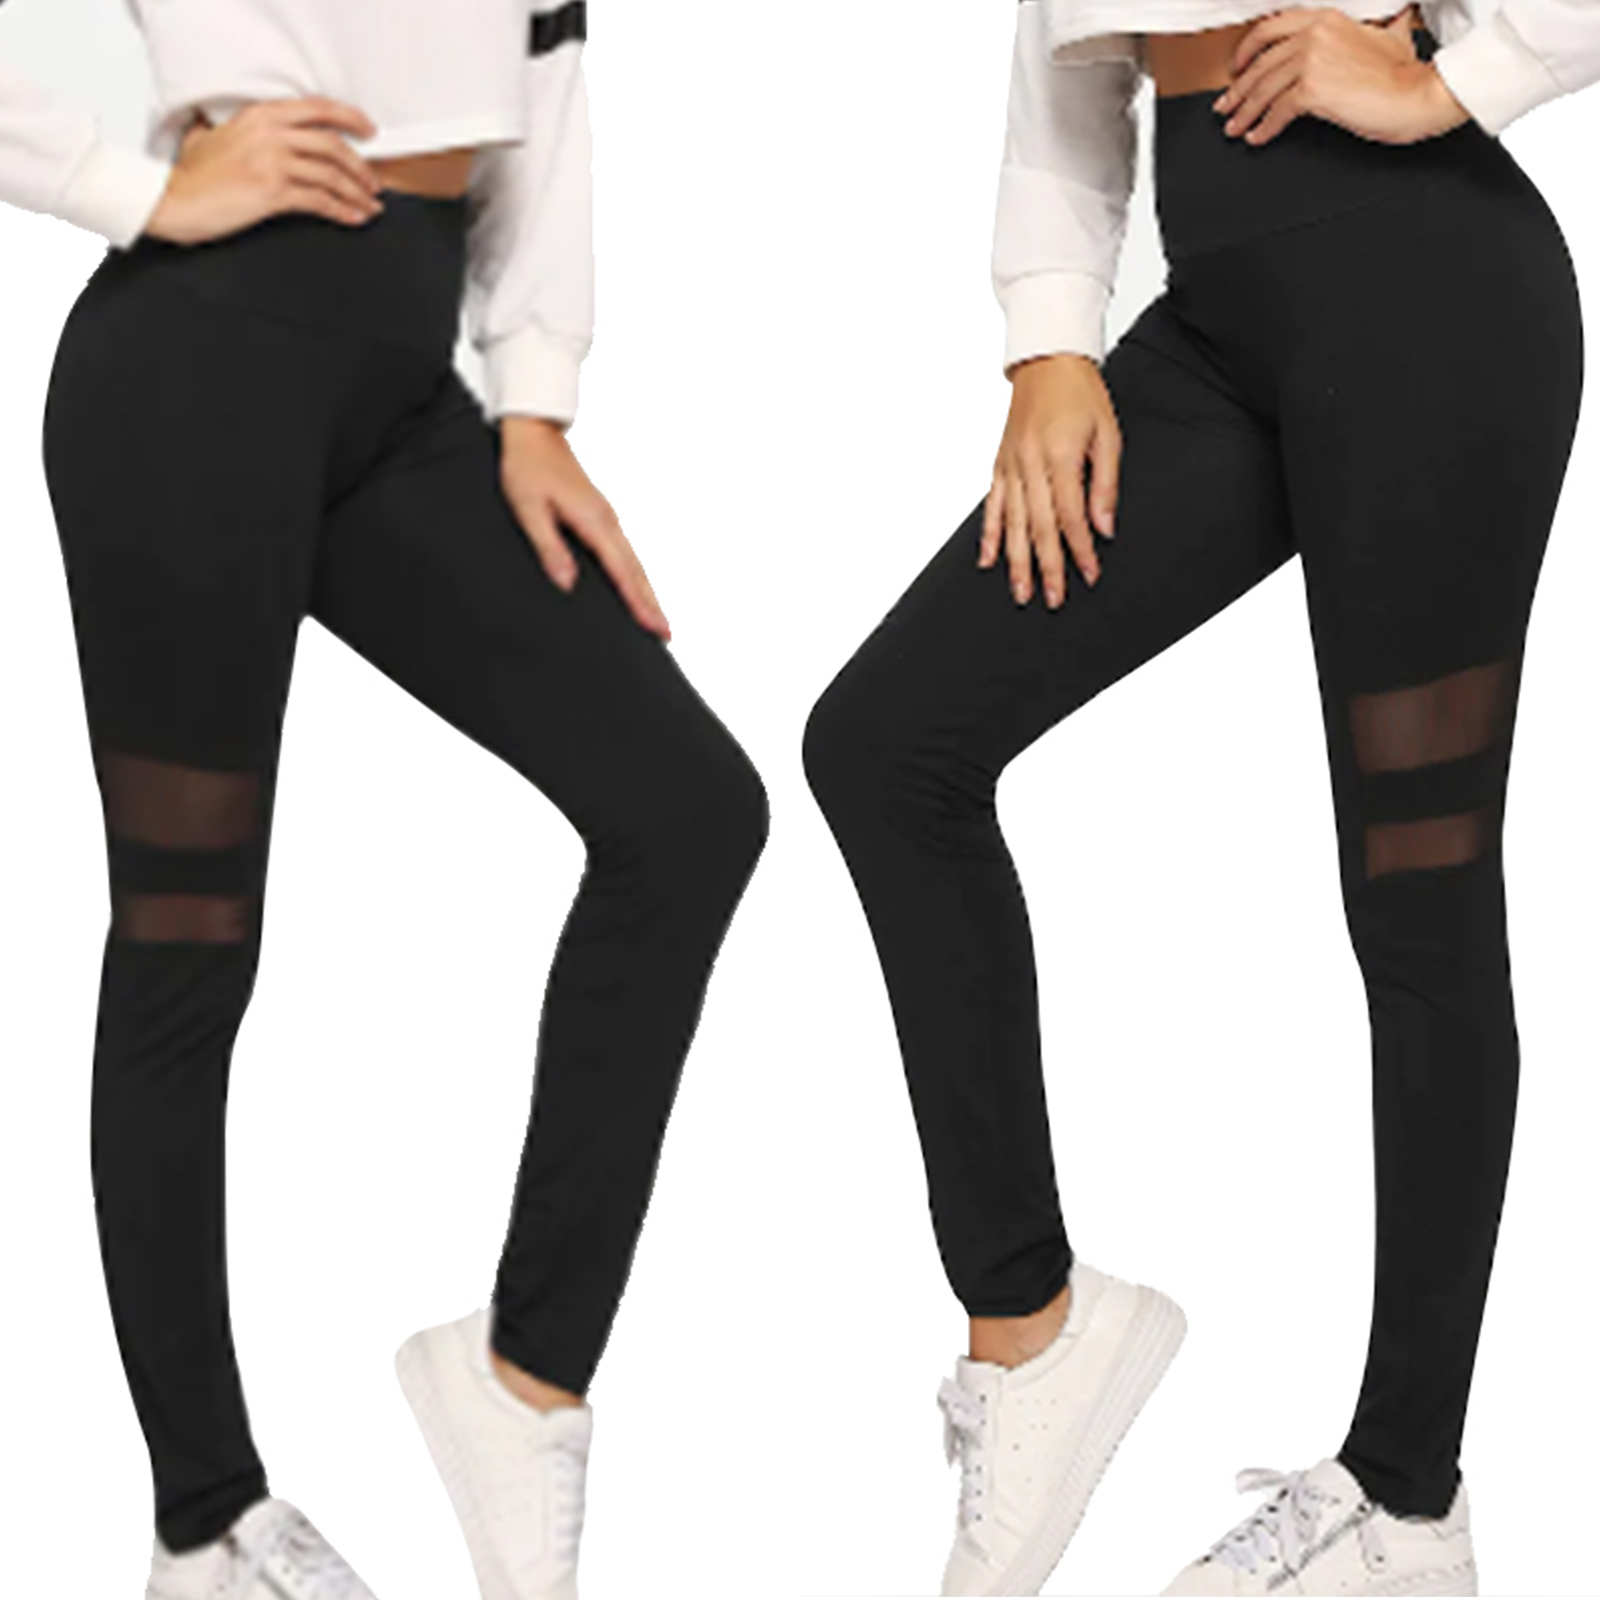 FJS UNISEX CYCLING RUNNING GYM LEGGINGS TROUSERS YOGA EXERCISE SPORTS TIGHTS 